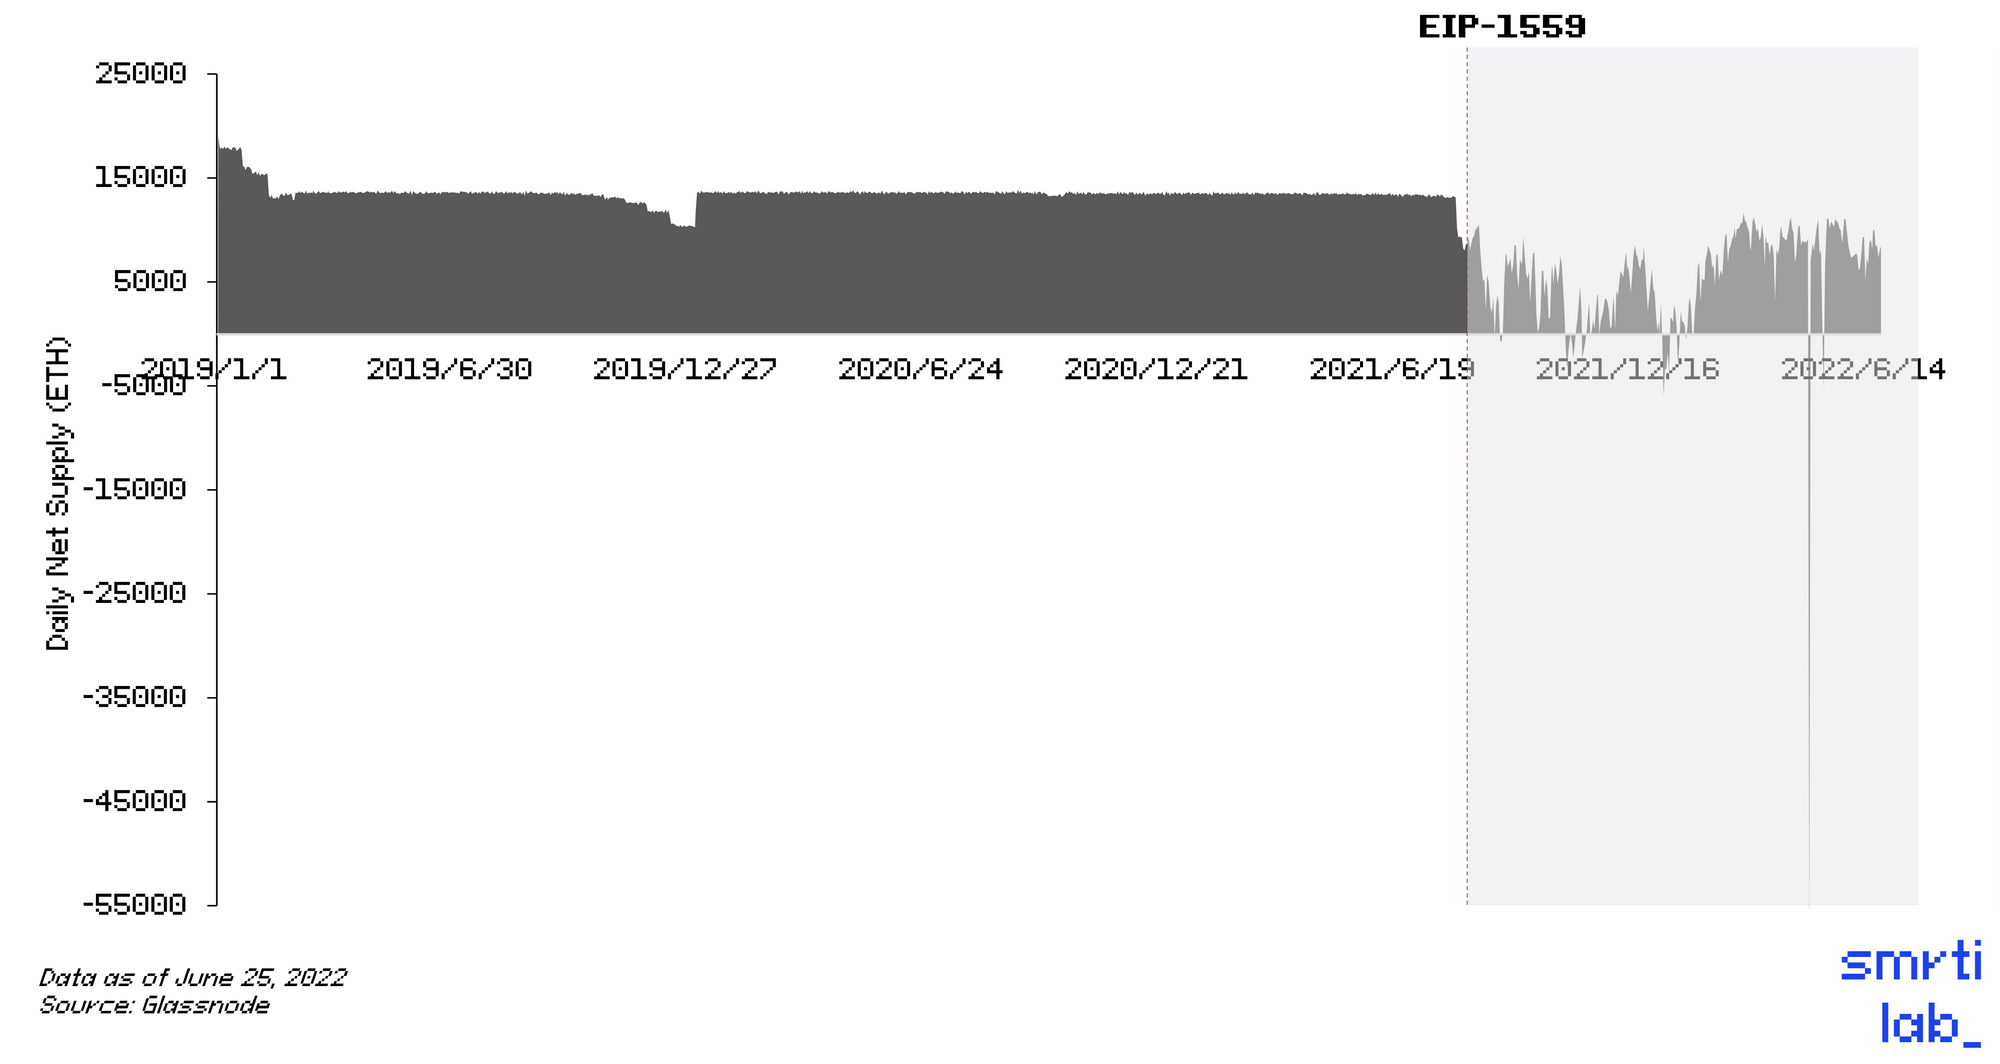 Fig 8. Daily Net Supply before and after EIP-1559